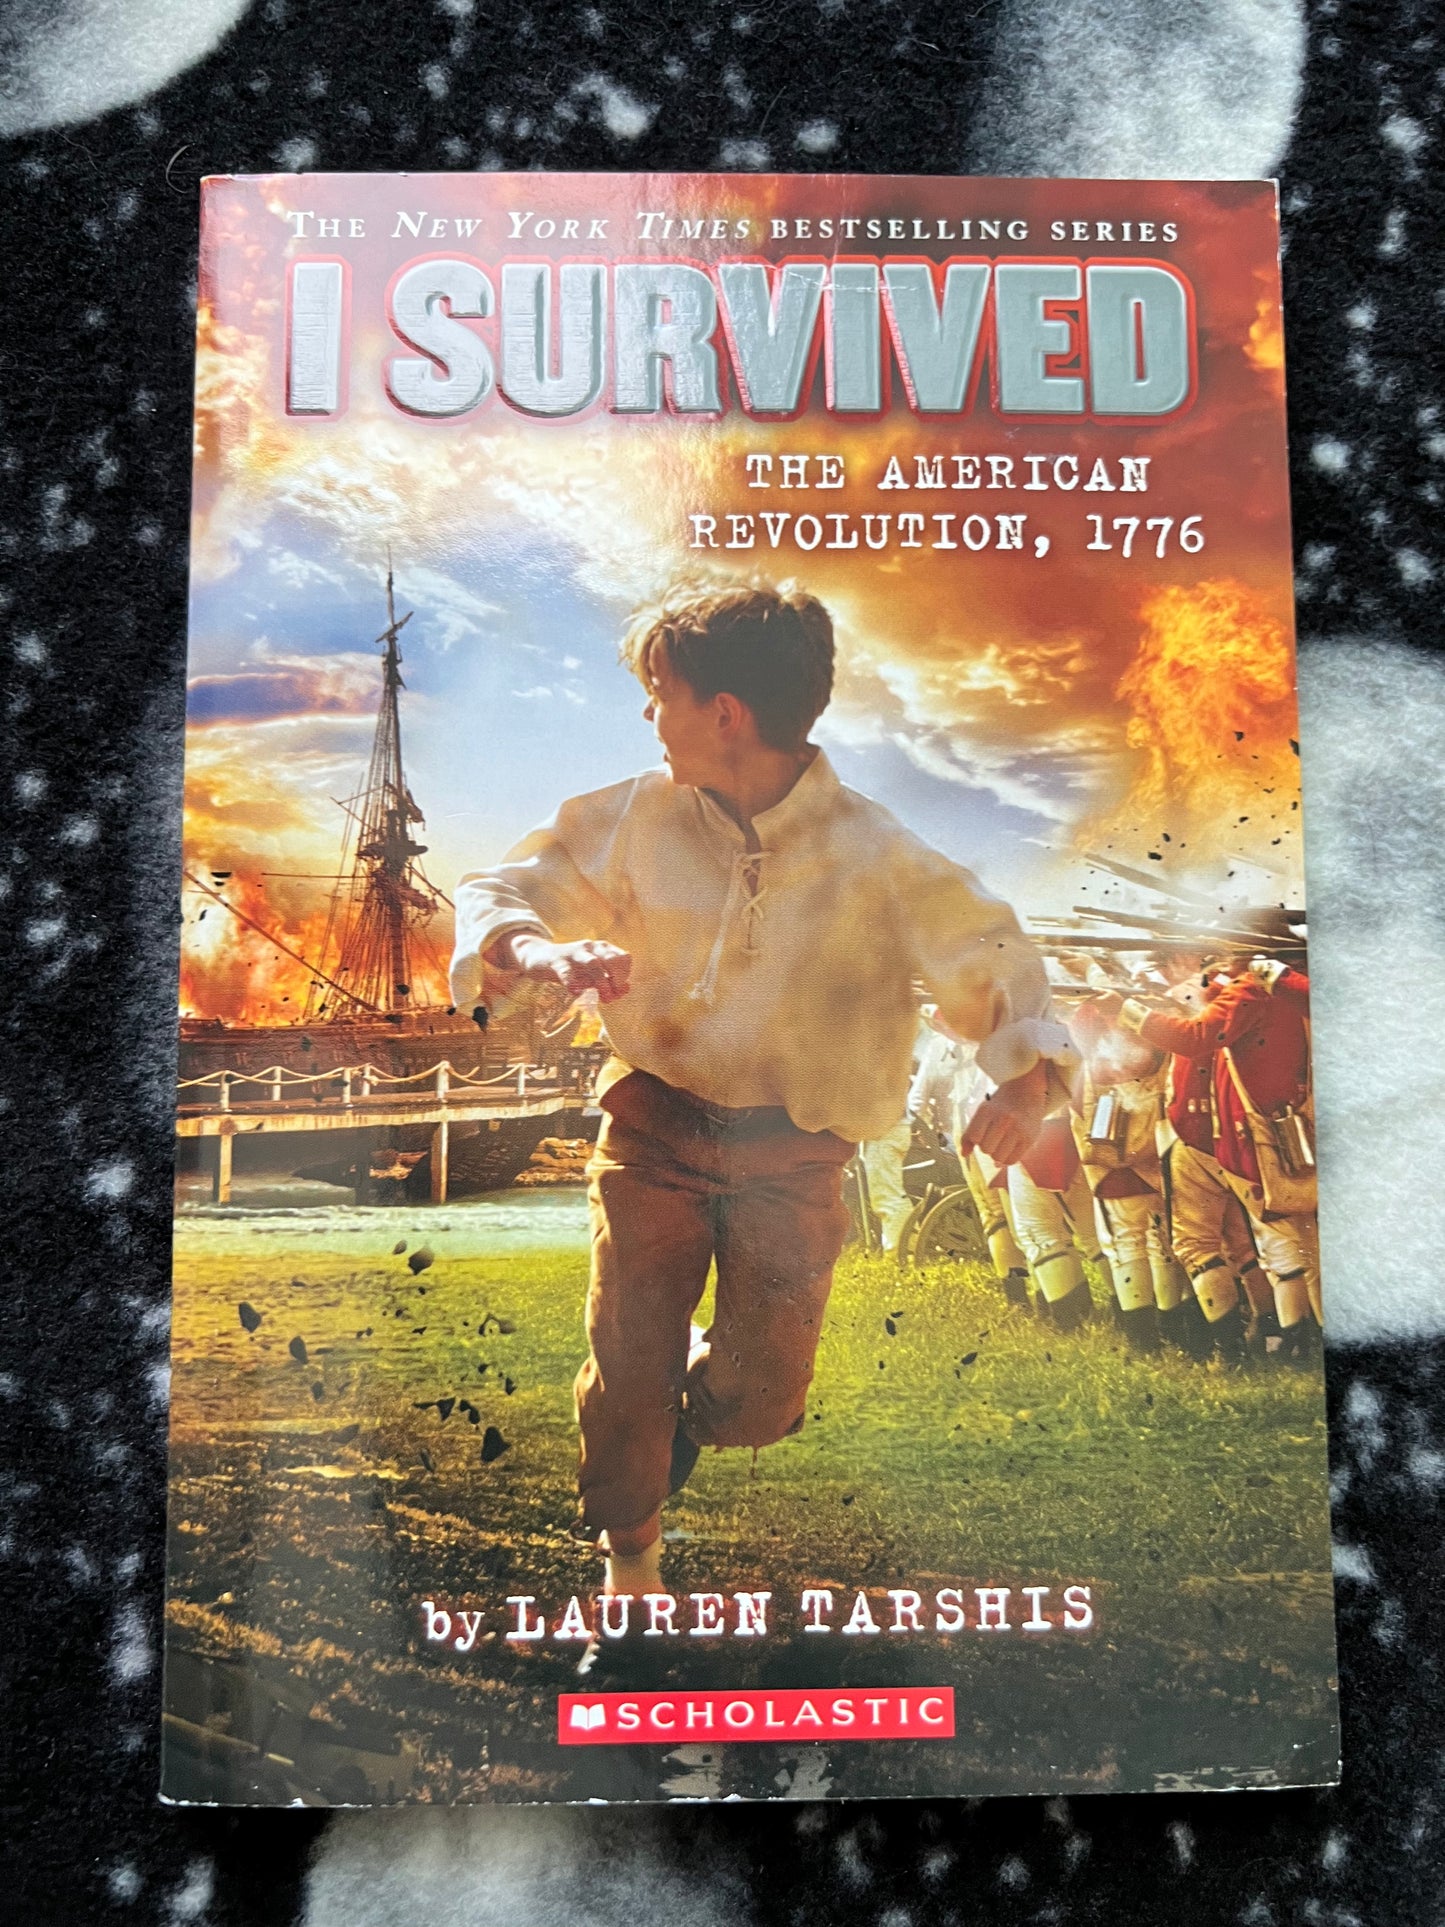 I Survived: The American Revolution, 1776